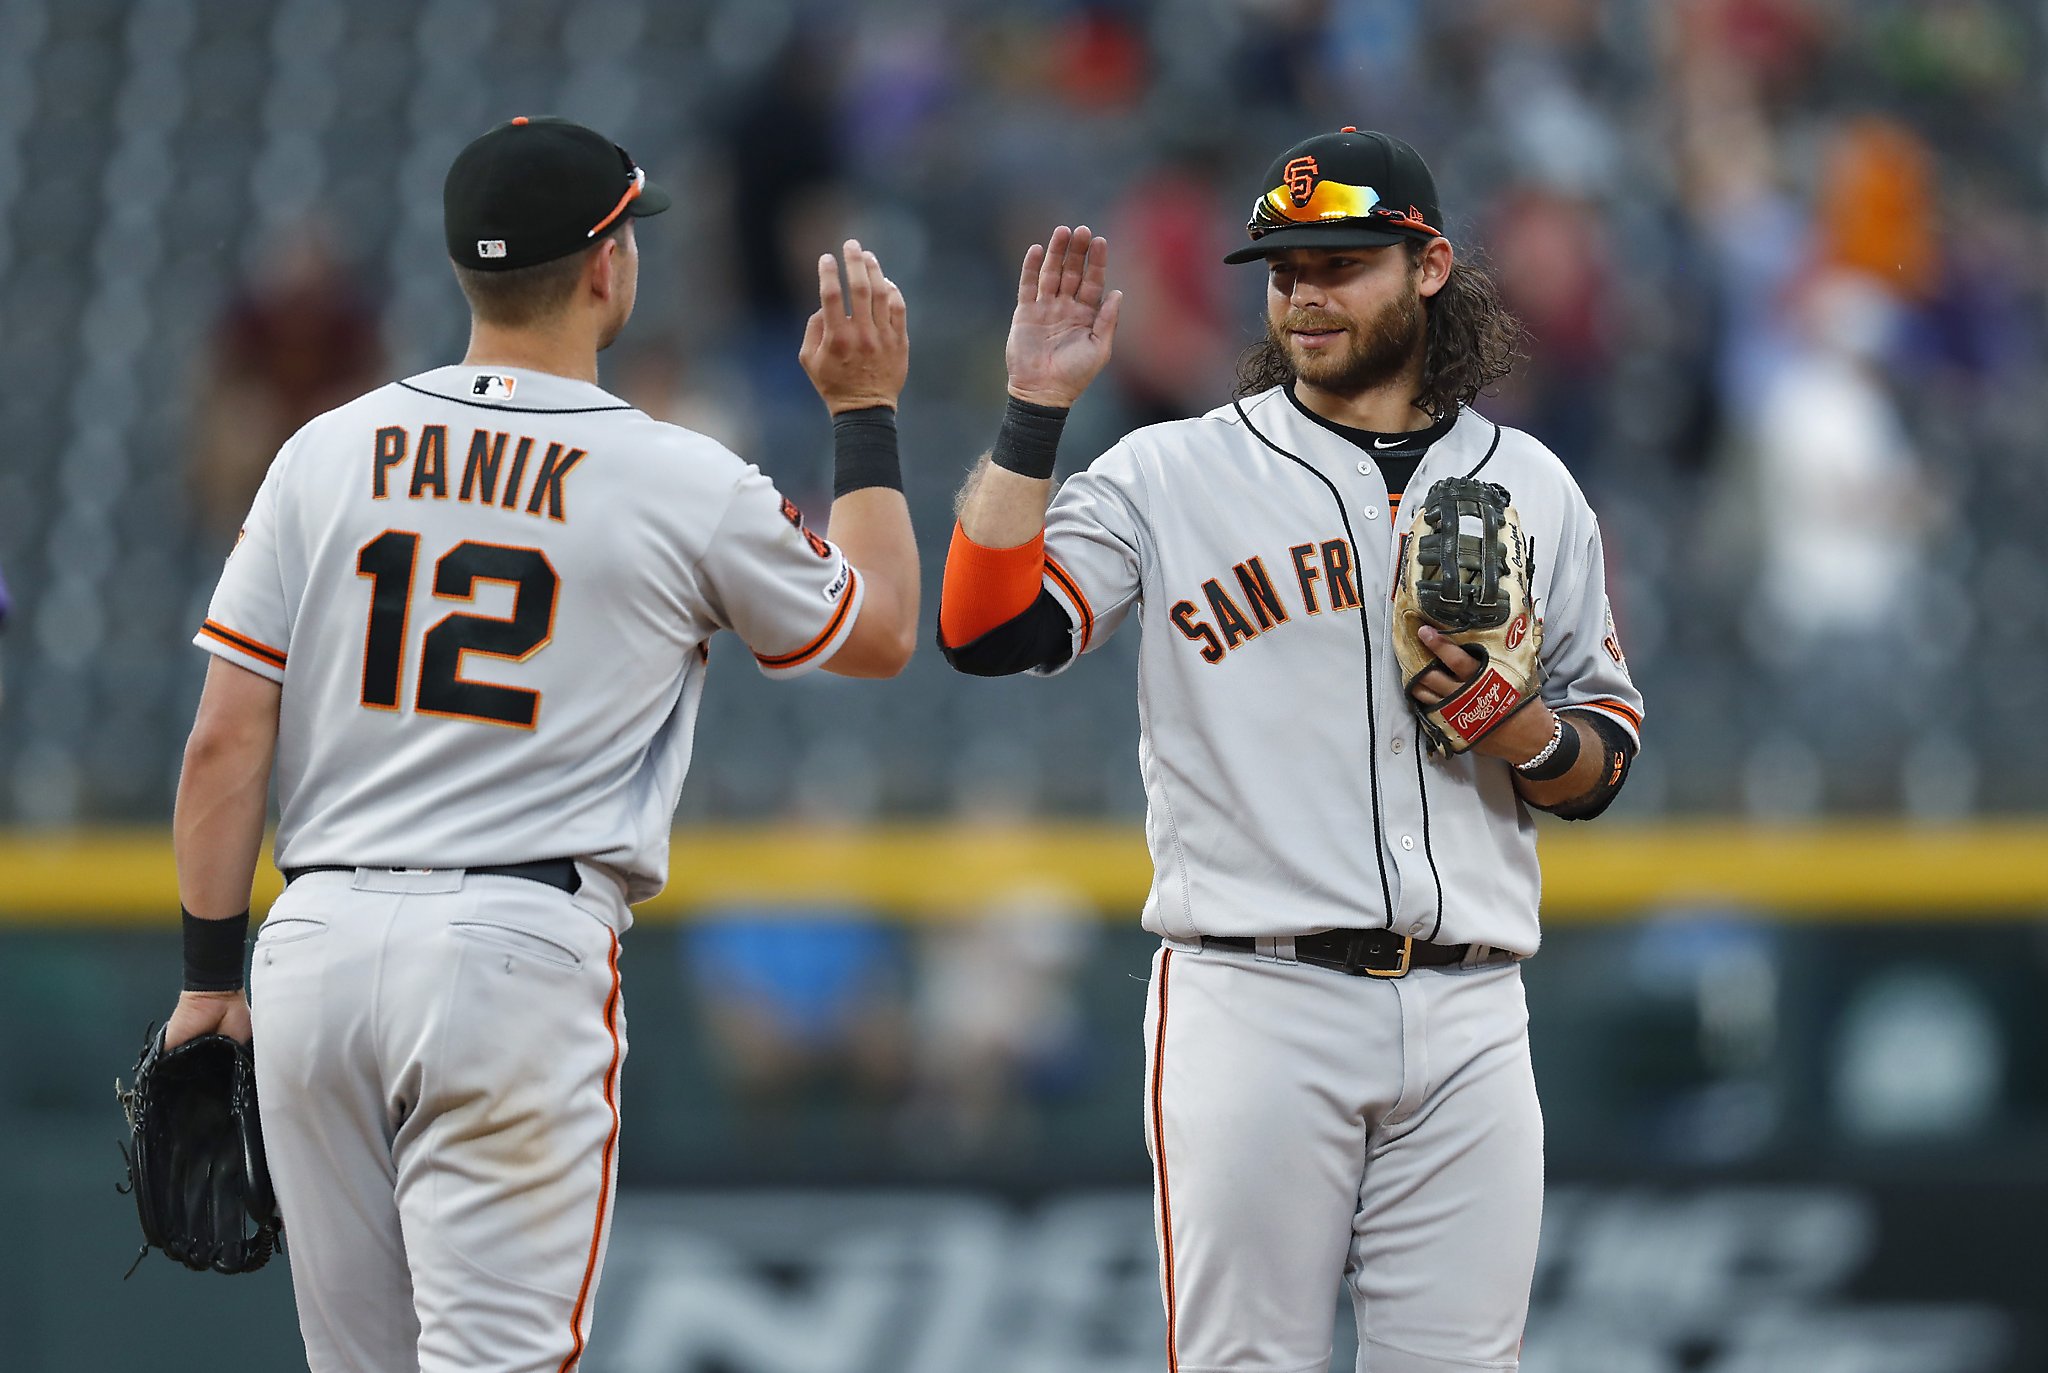 Giants receive another blast from Joe Panik and near perfection